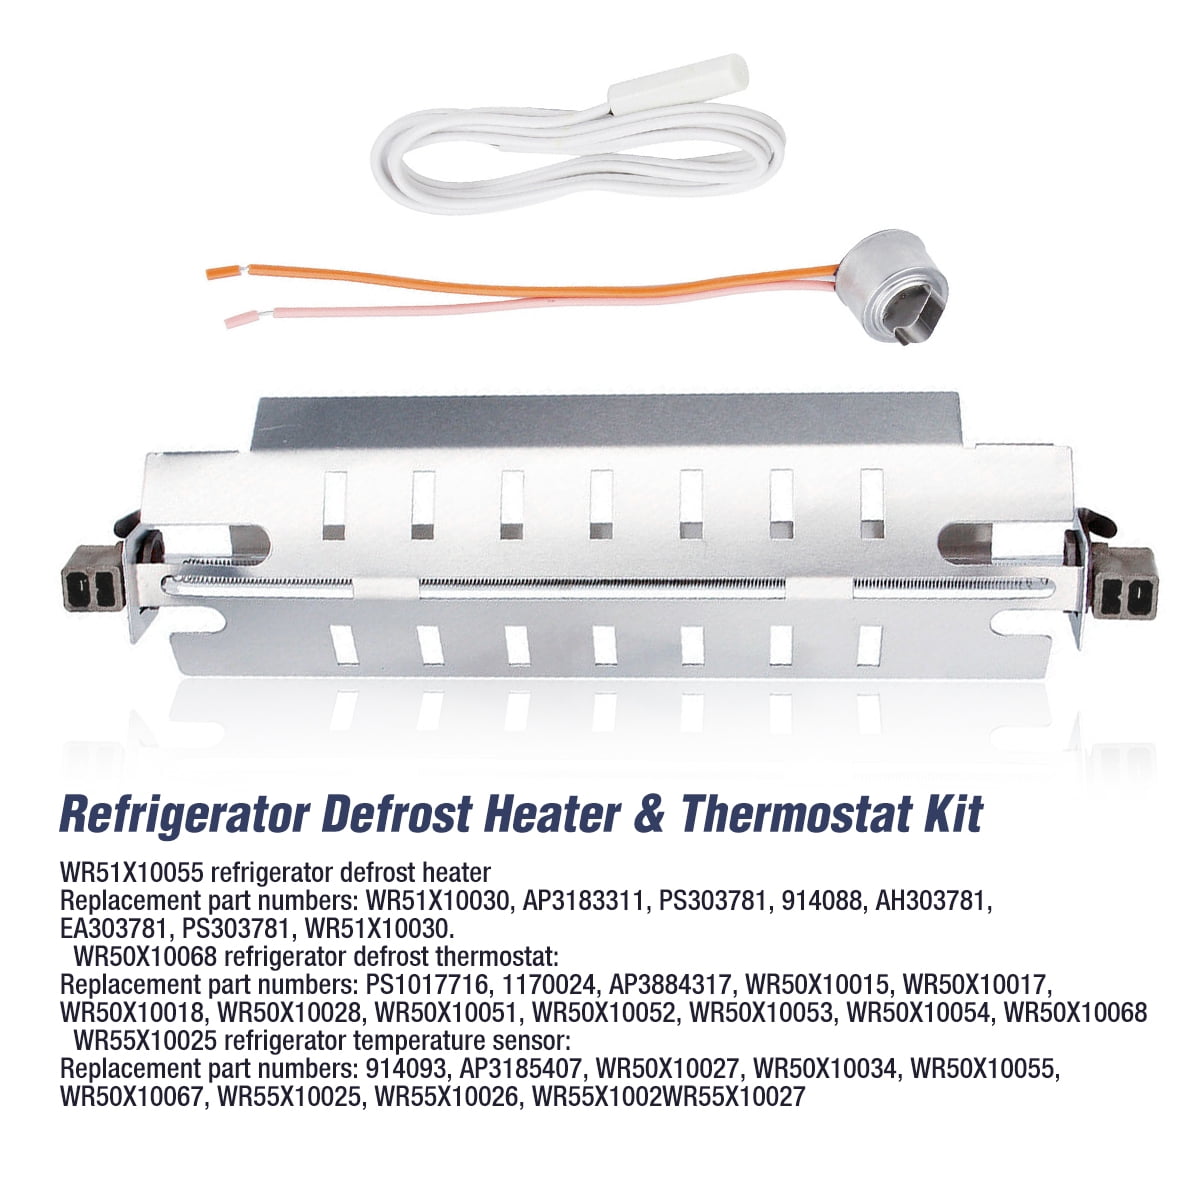 WR50X10068 Defrost Thermostat Replace 1170024 AP3884317 PS1017716 WR55X10025 Refrigerator Temperature Sensor Replace 914093 Compatible with GE Refrigerators 2 Pieces AP3185407 